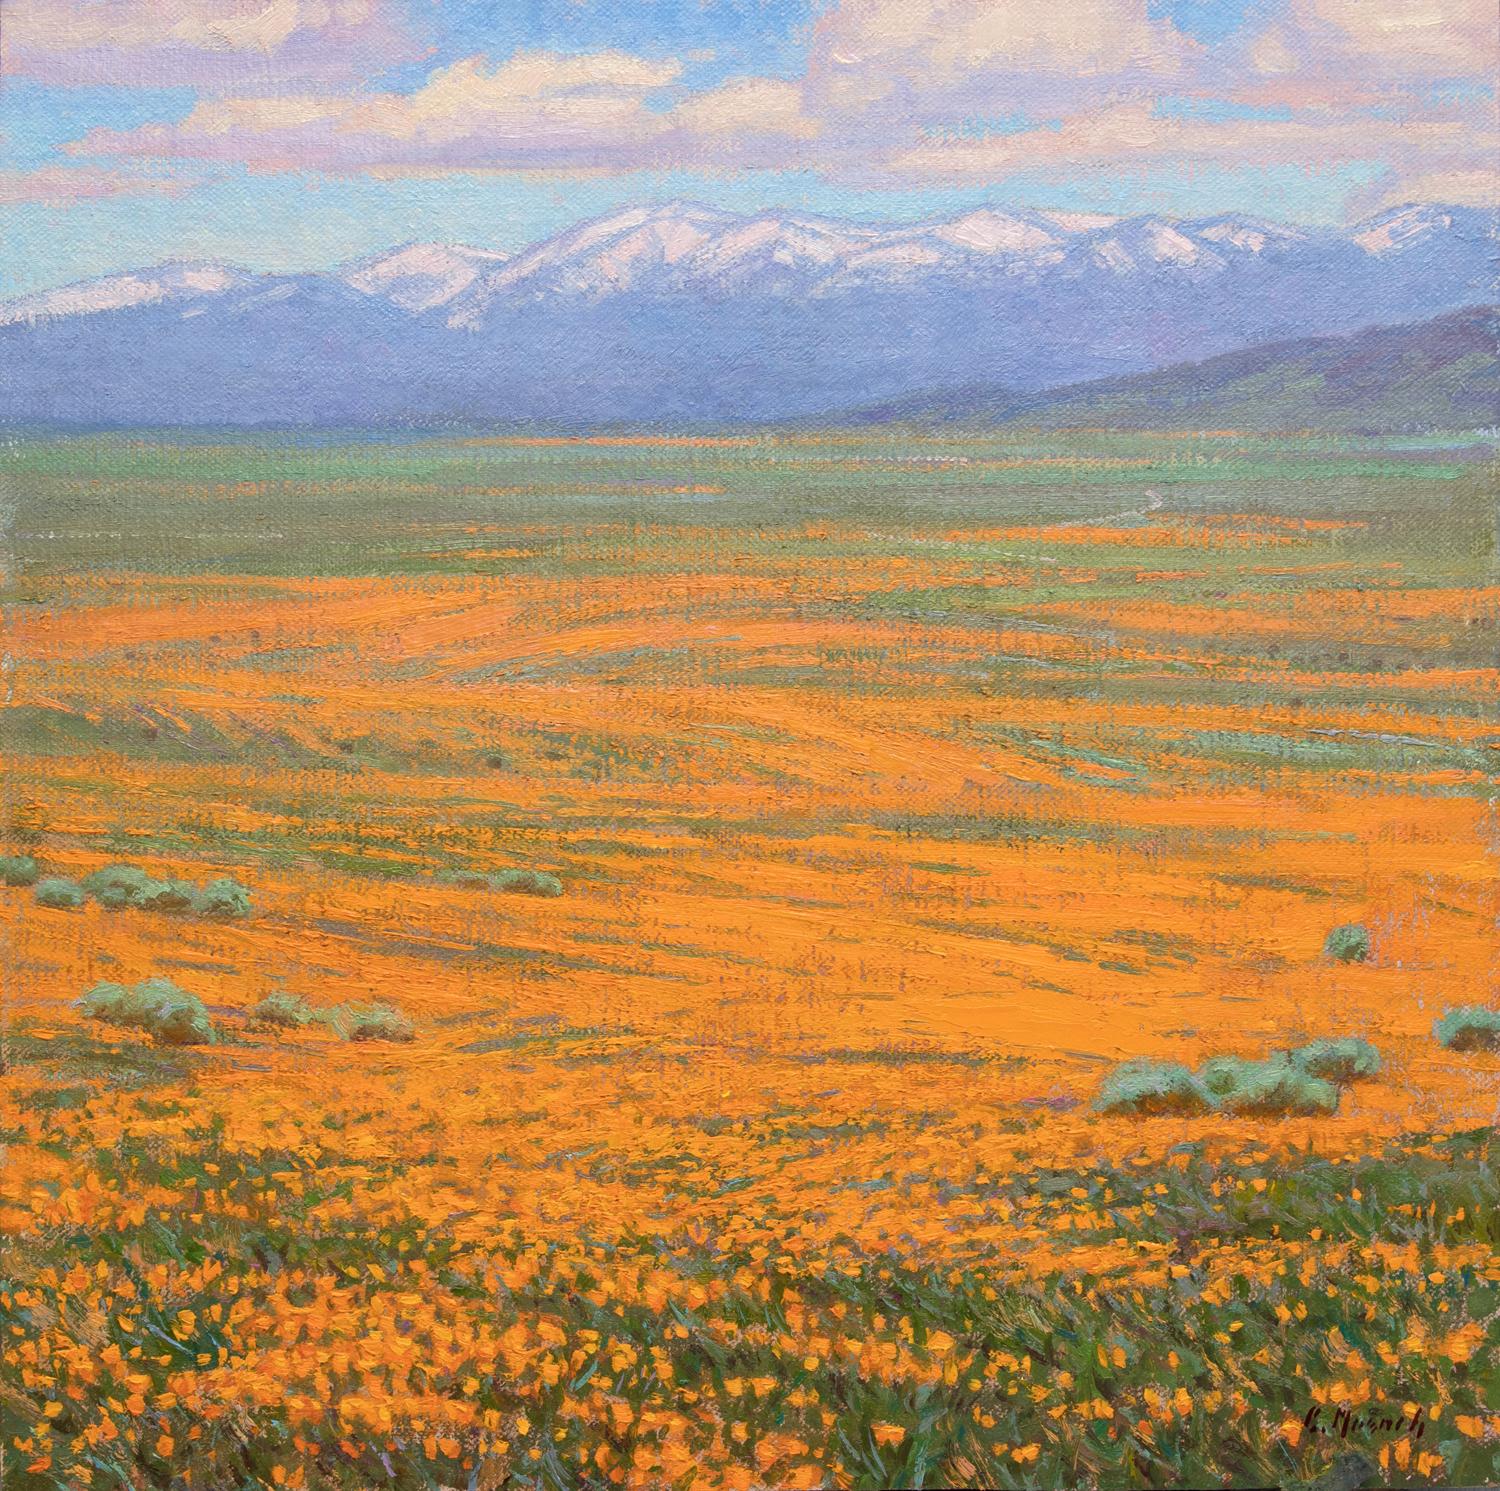 California Superbloom - Painting by Charles Muench